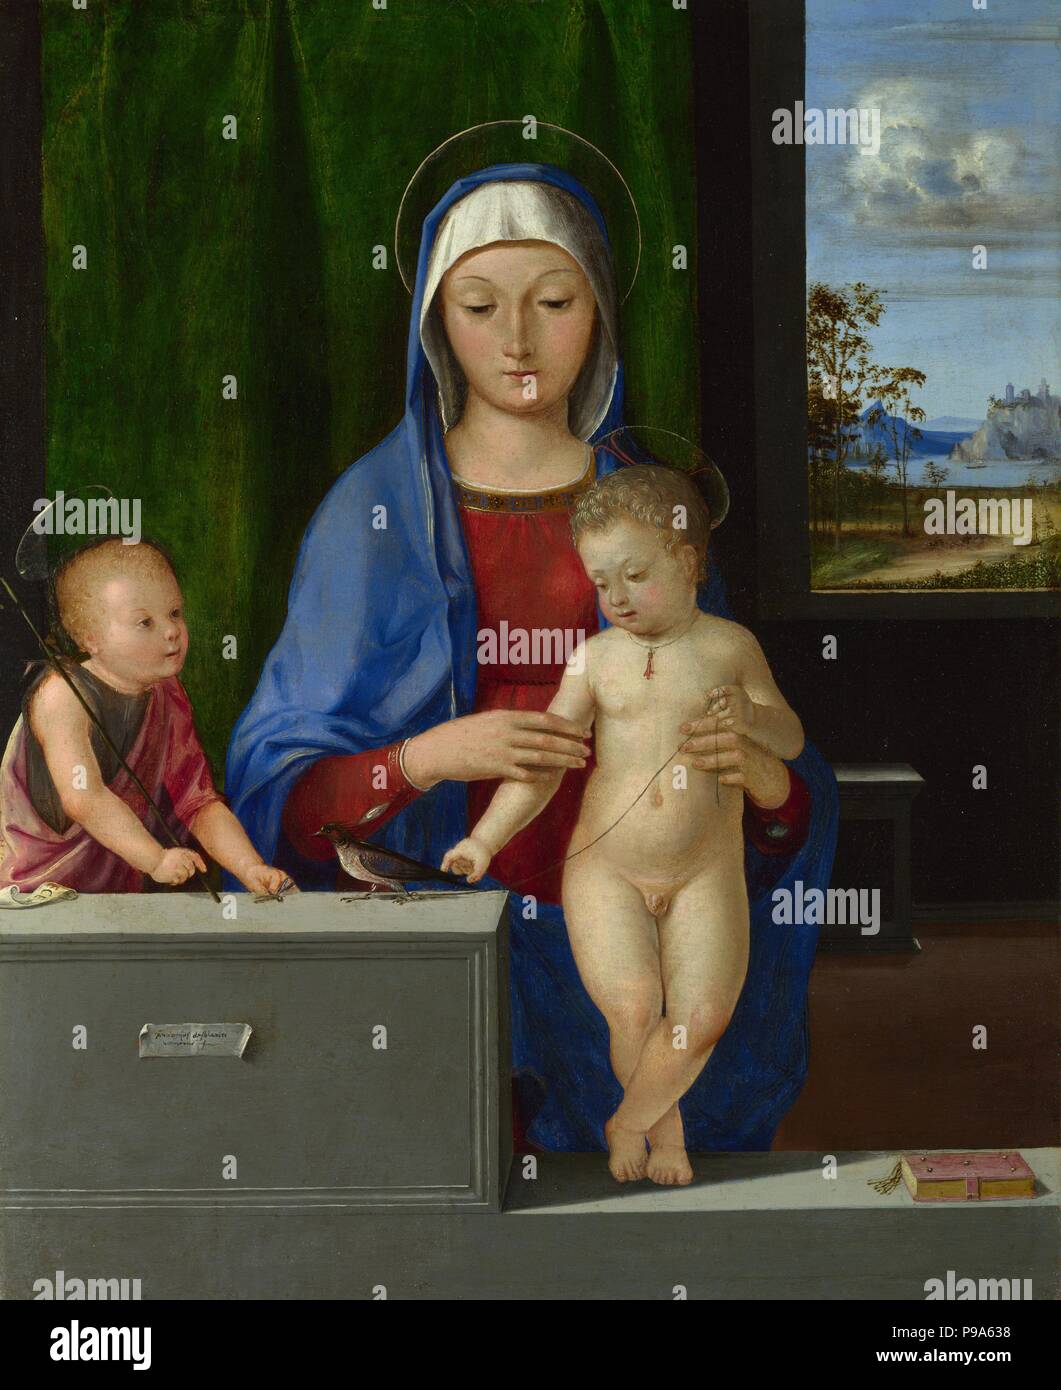 The Virgin and Child with Saint John. Museum: National Gallery, London. Stock Photo